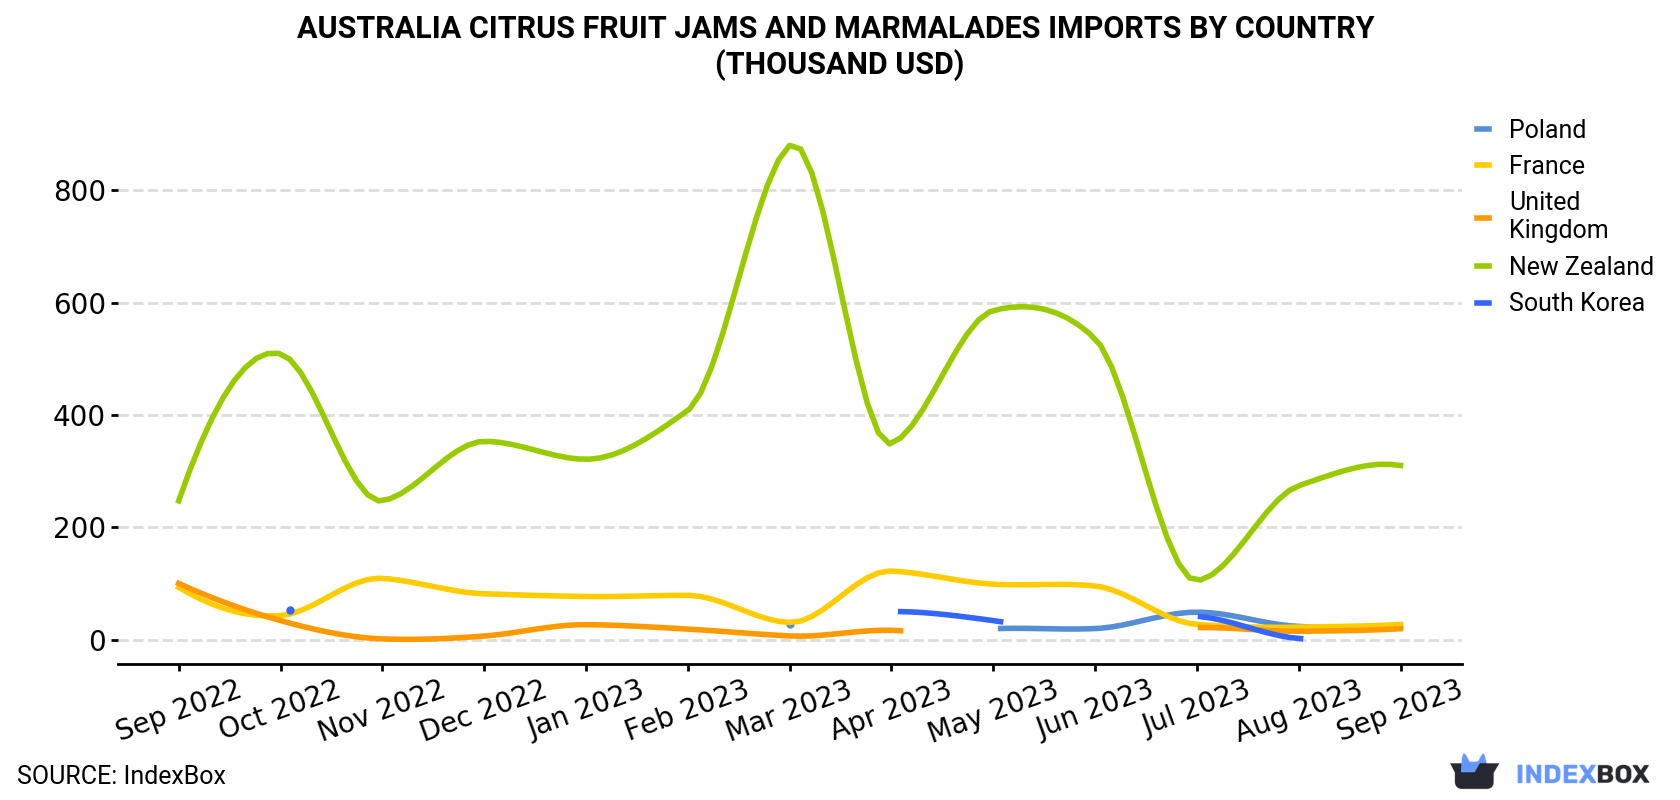 Australia Citrus Fruit Jams and Marmalades Imports By Country (Thousand USD)